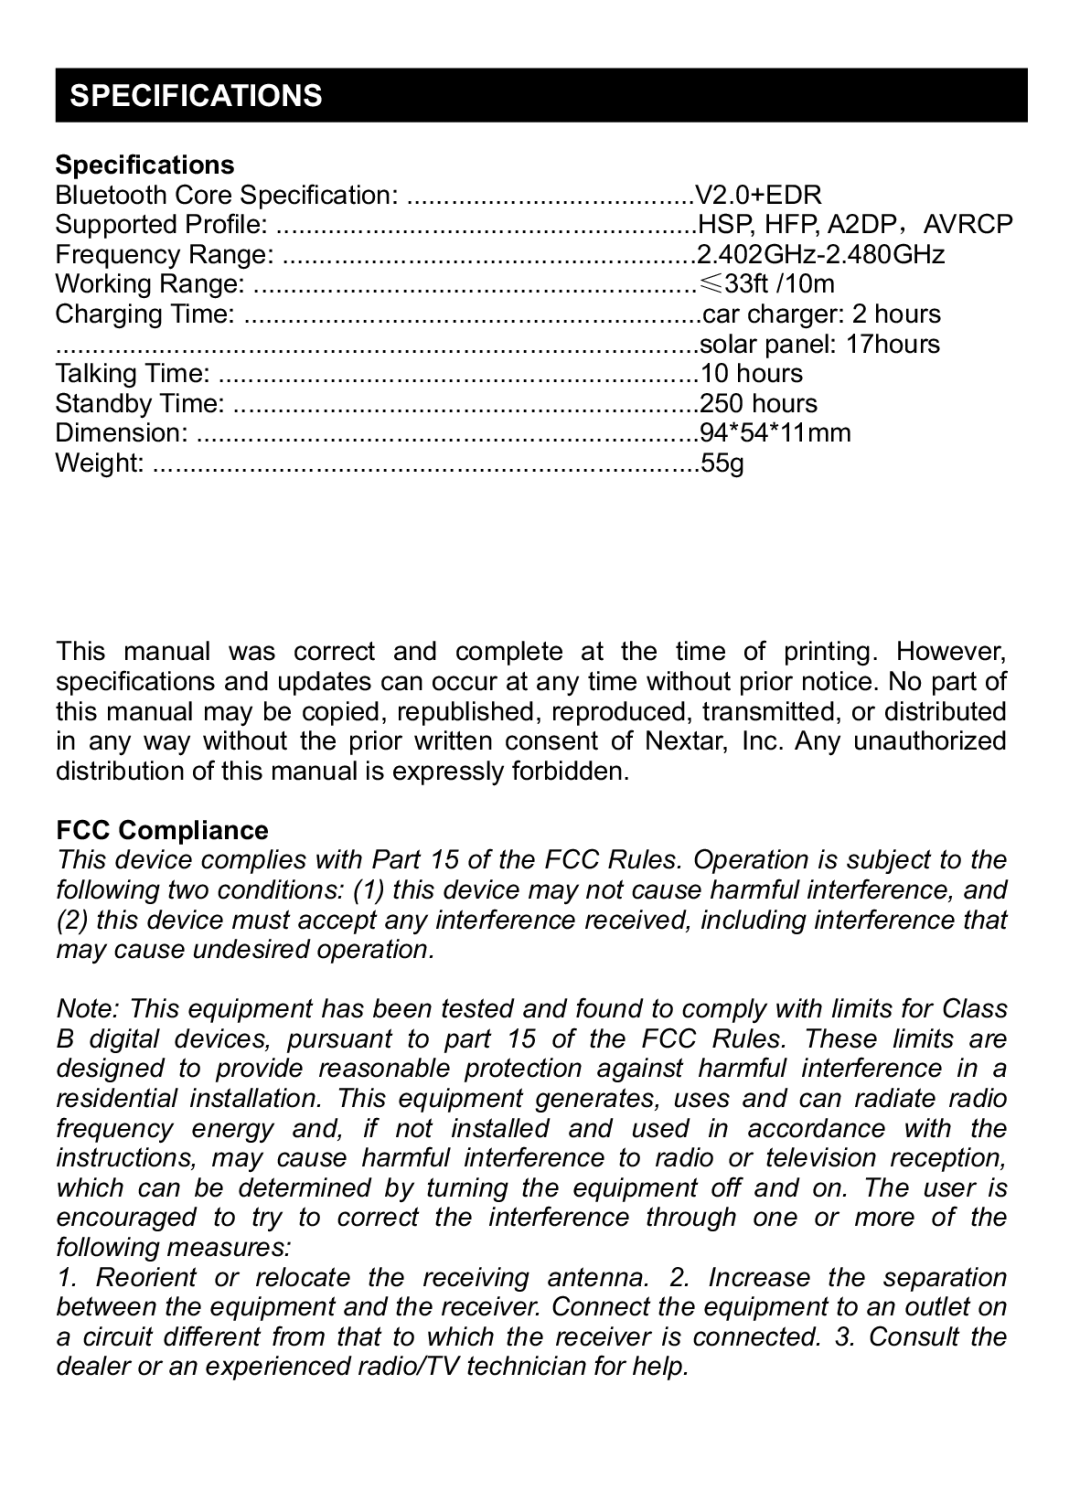 Nextar NXBT-001 manual Specifications, FCC Compliance 